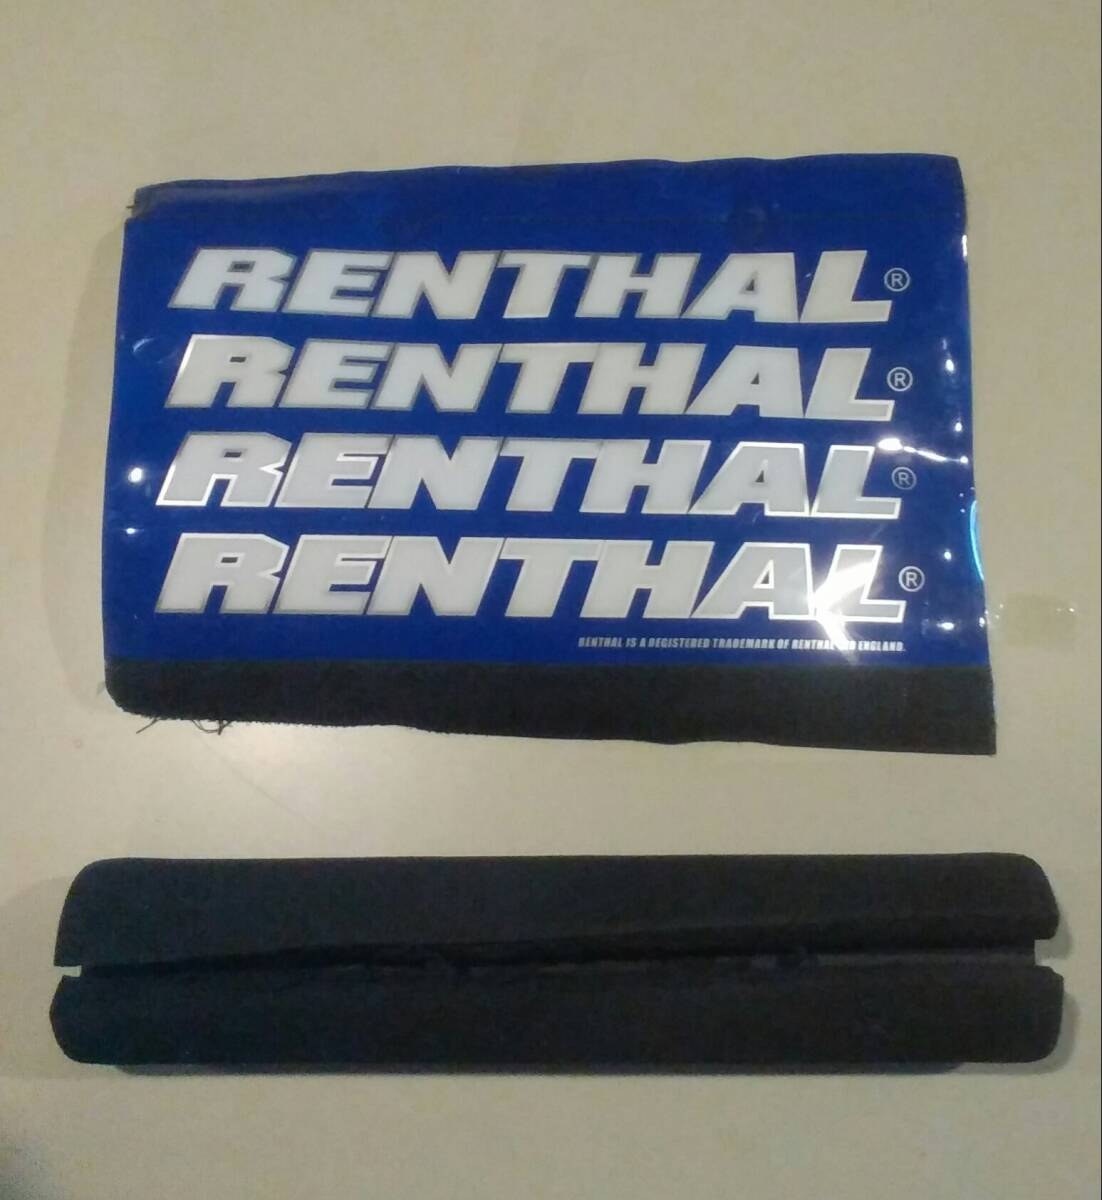 * Renthal handlebar pad blue series blue purple color non-standard-sized mail free *